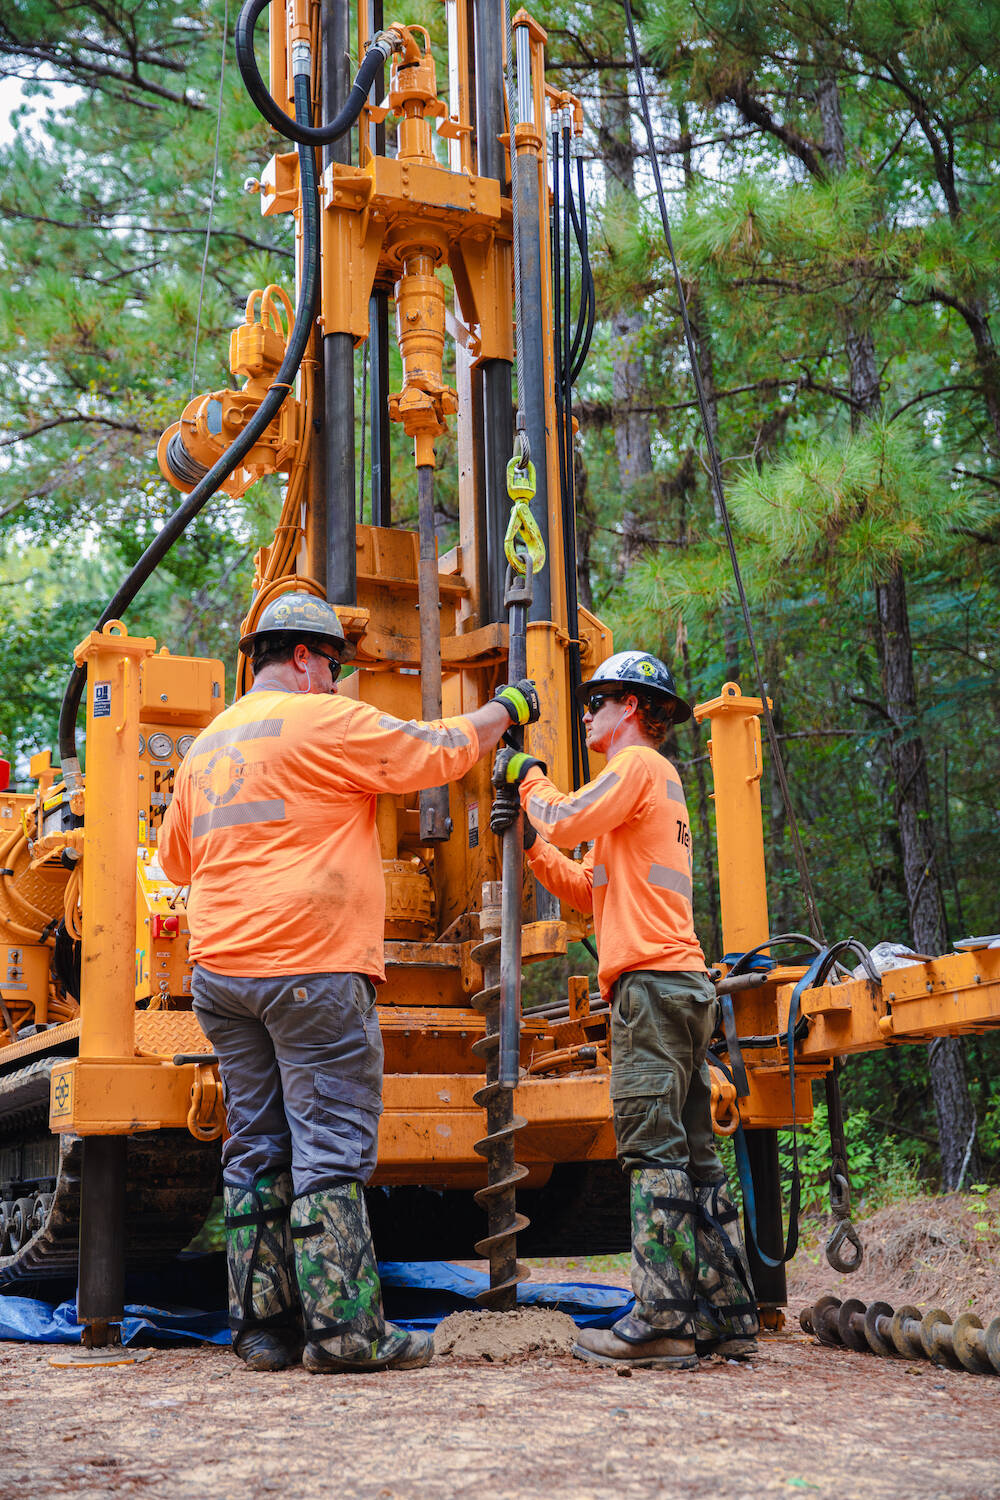 Two workers wearing orange shirts and hard hats.